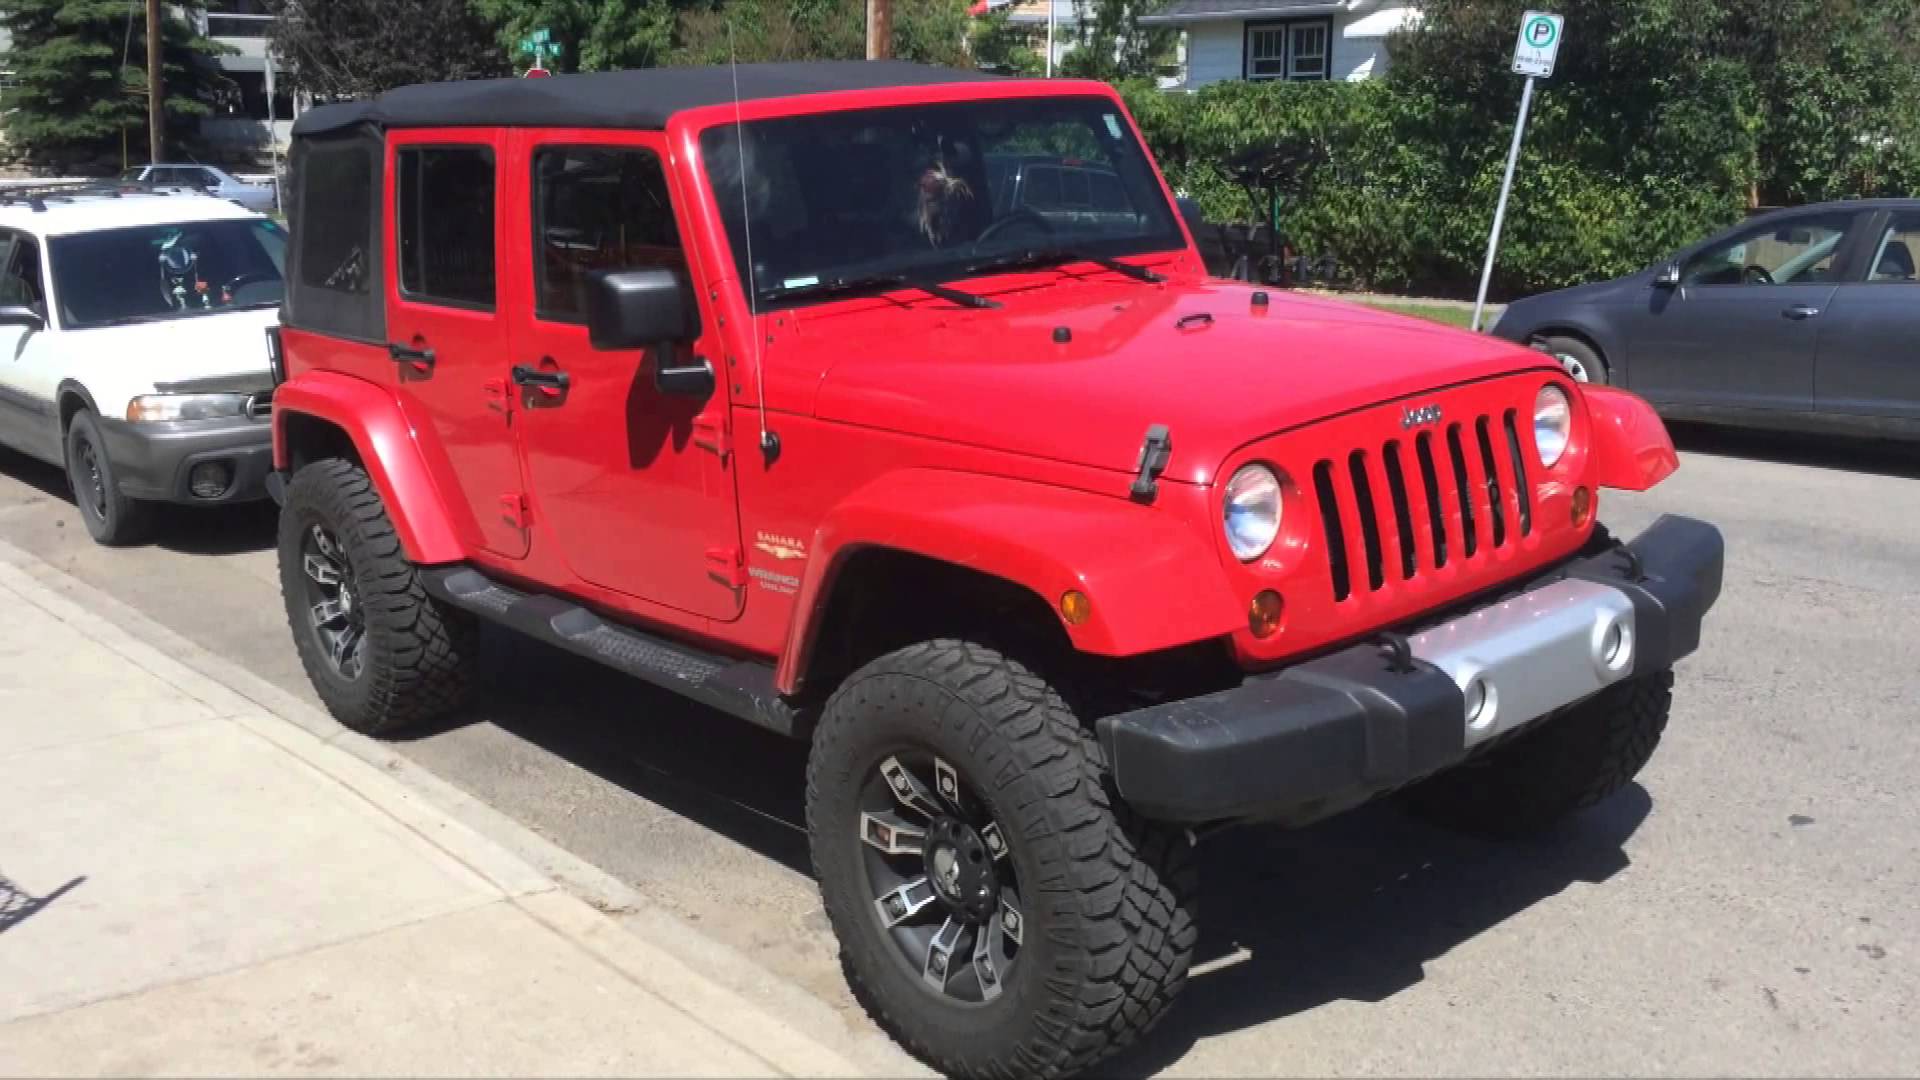 Red Jeep JK - YouTube